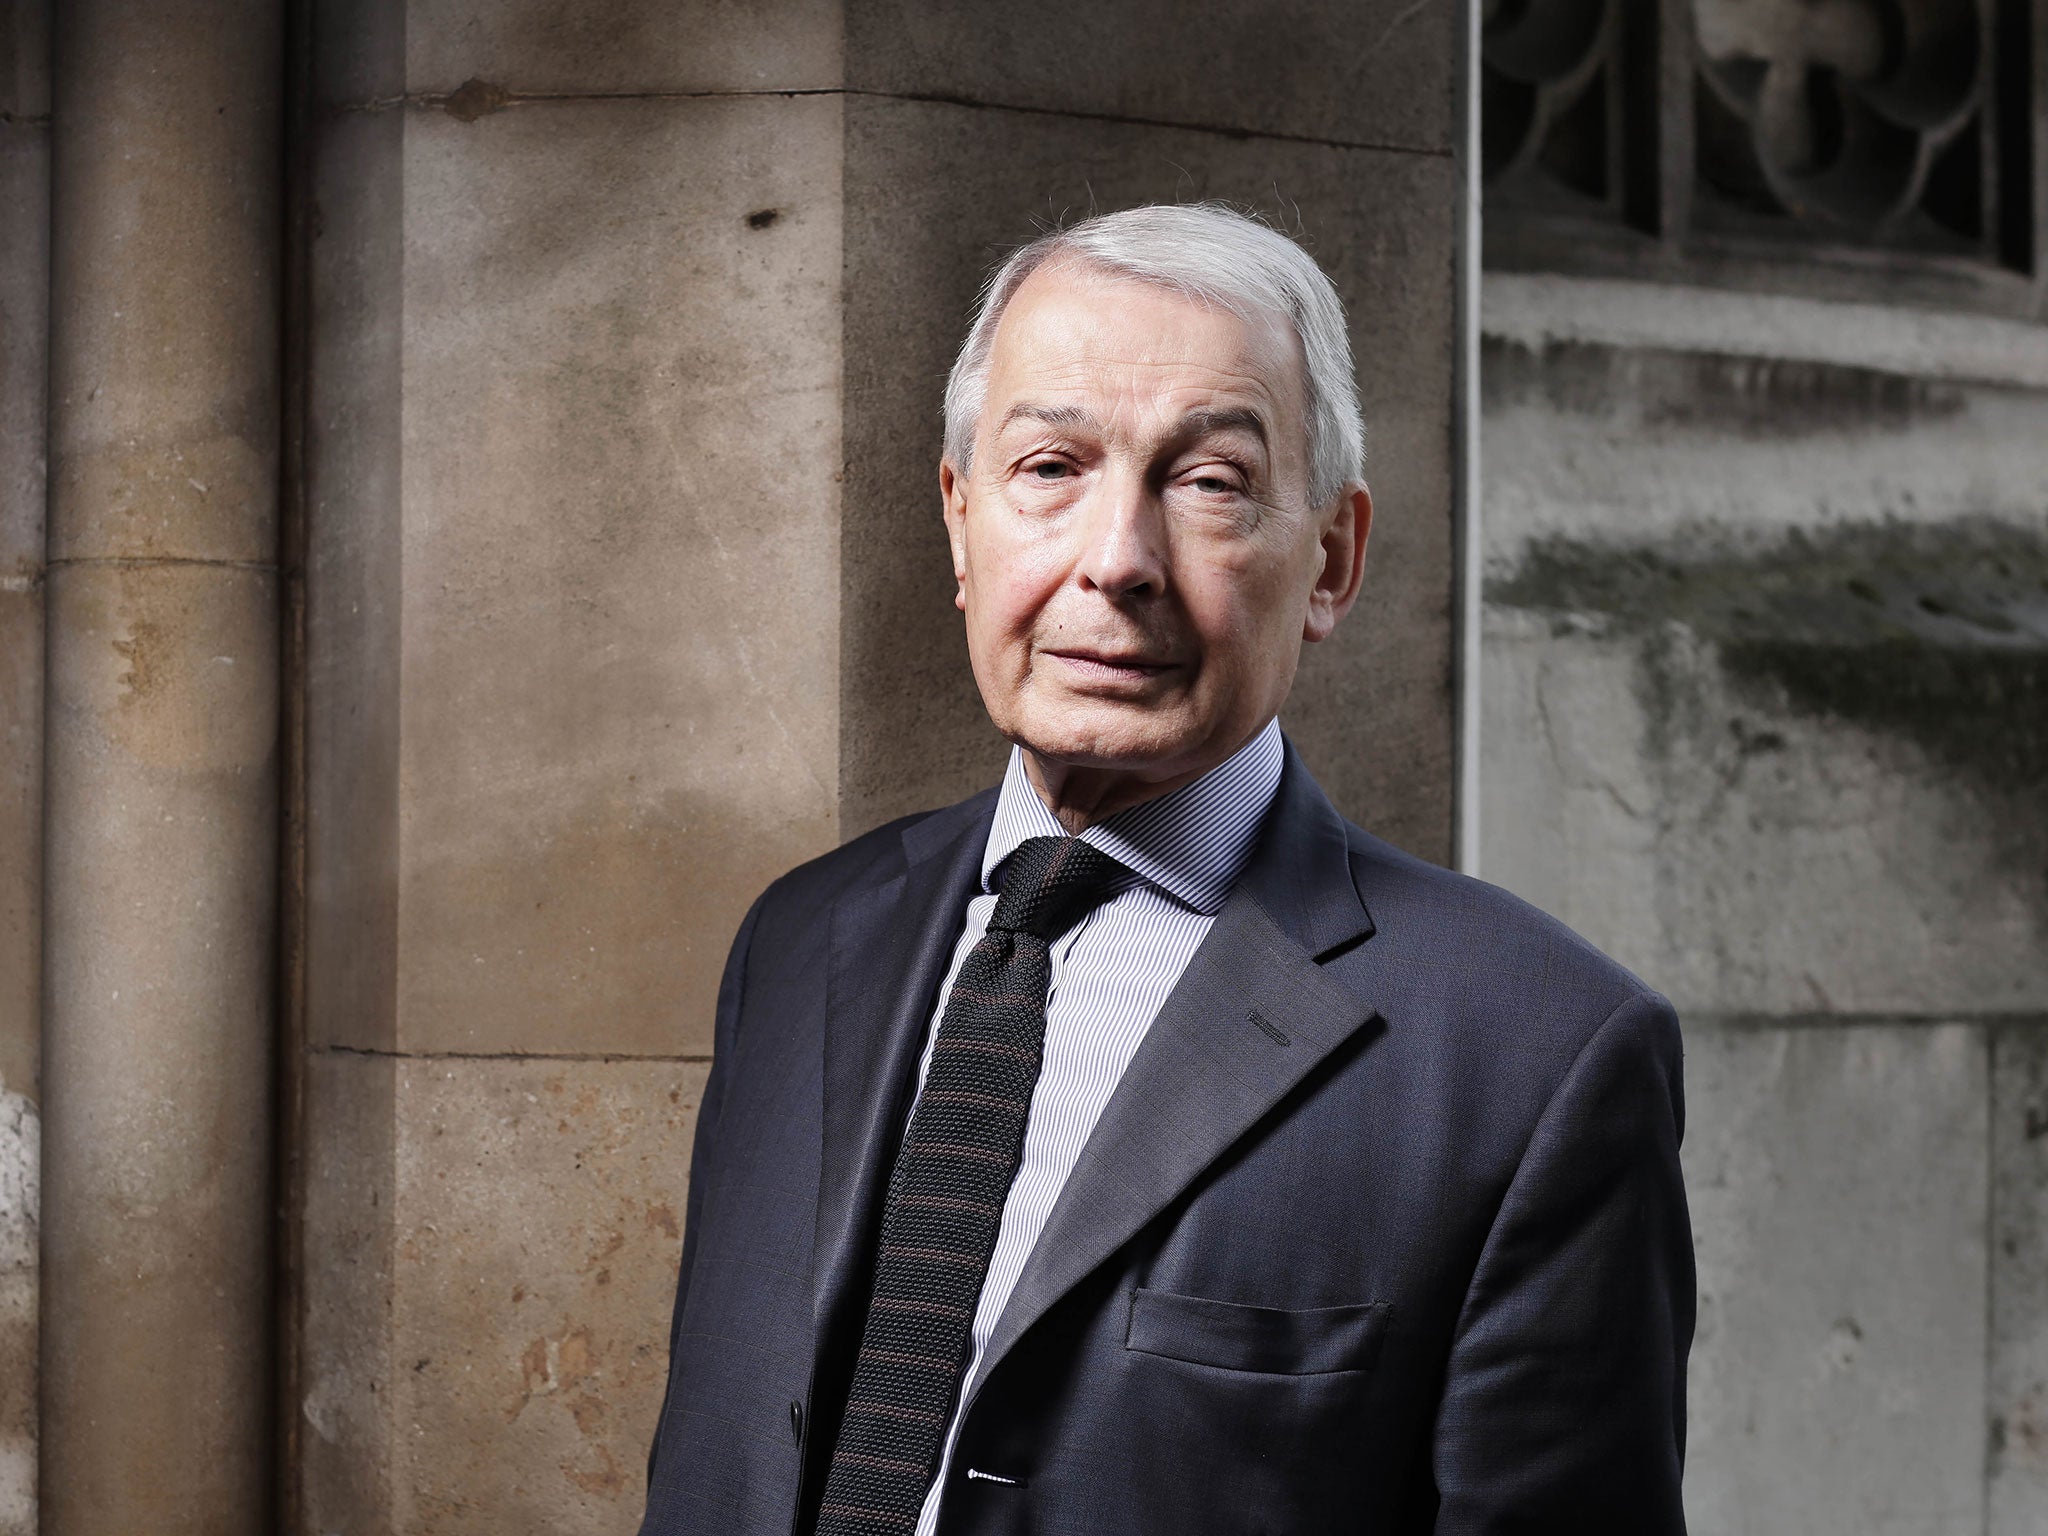 Frank Field said the ‘north London set’ within Labour were like ‘a Berlin Wall’